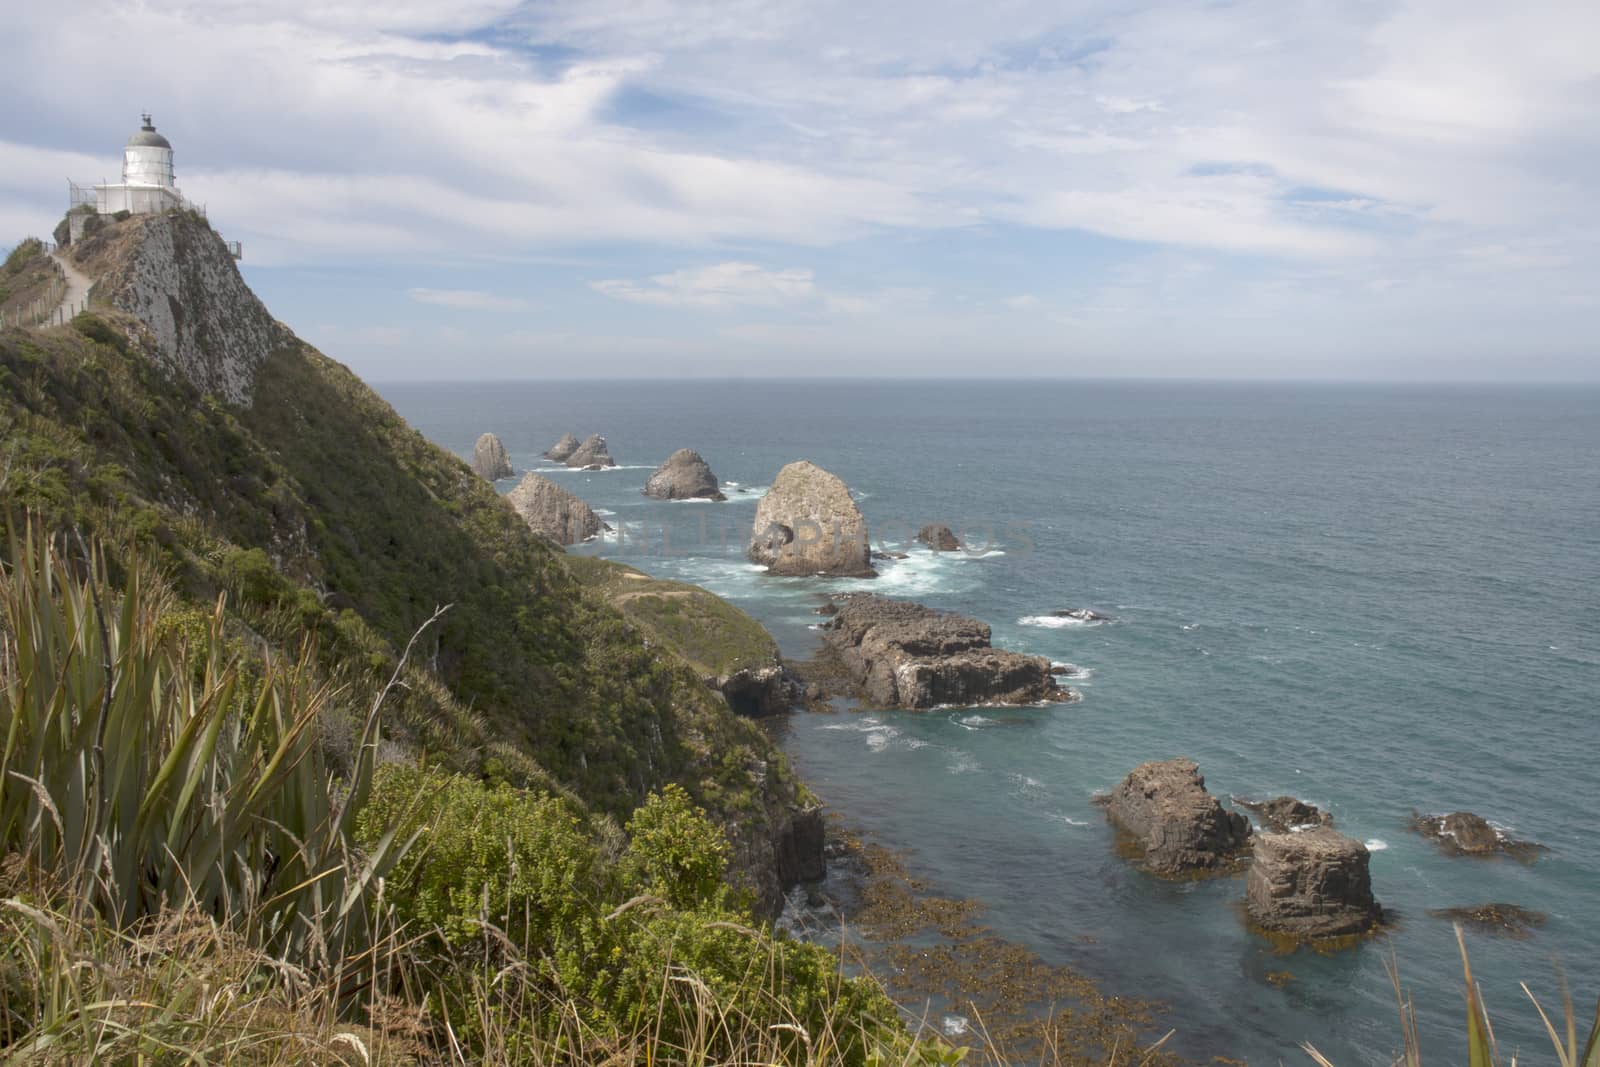 Lighthouse at Nugget Point, Otago, New Zealand overlooking the rocks